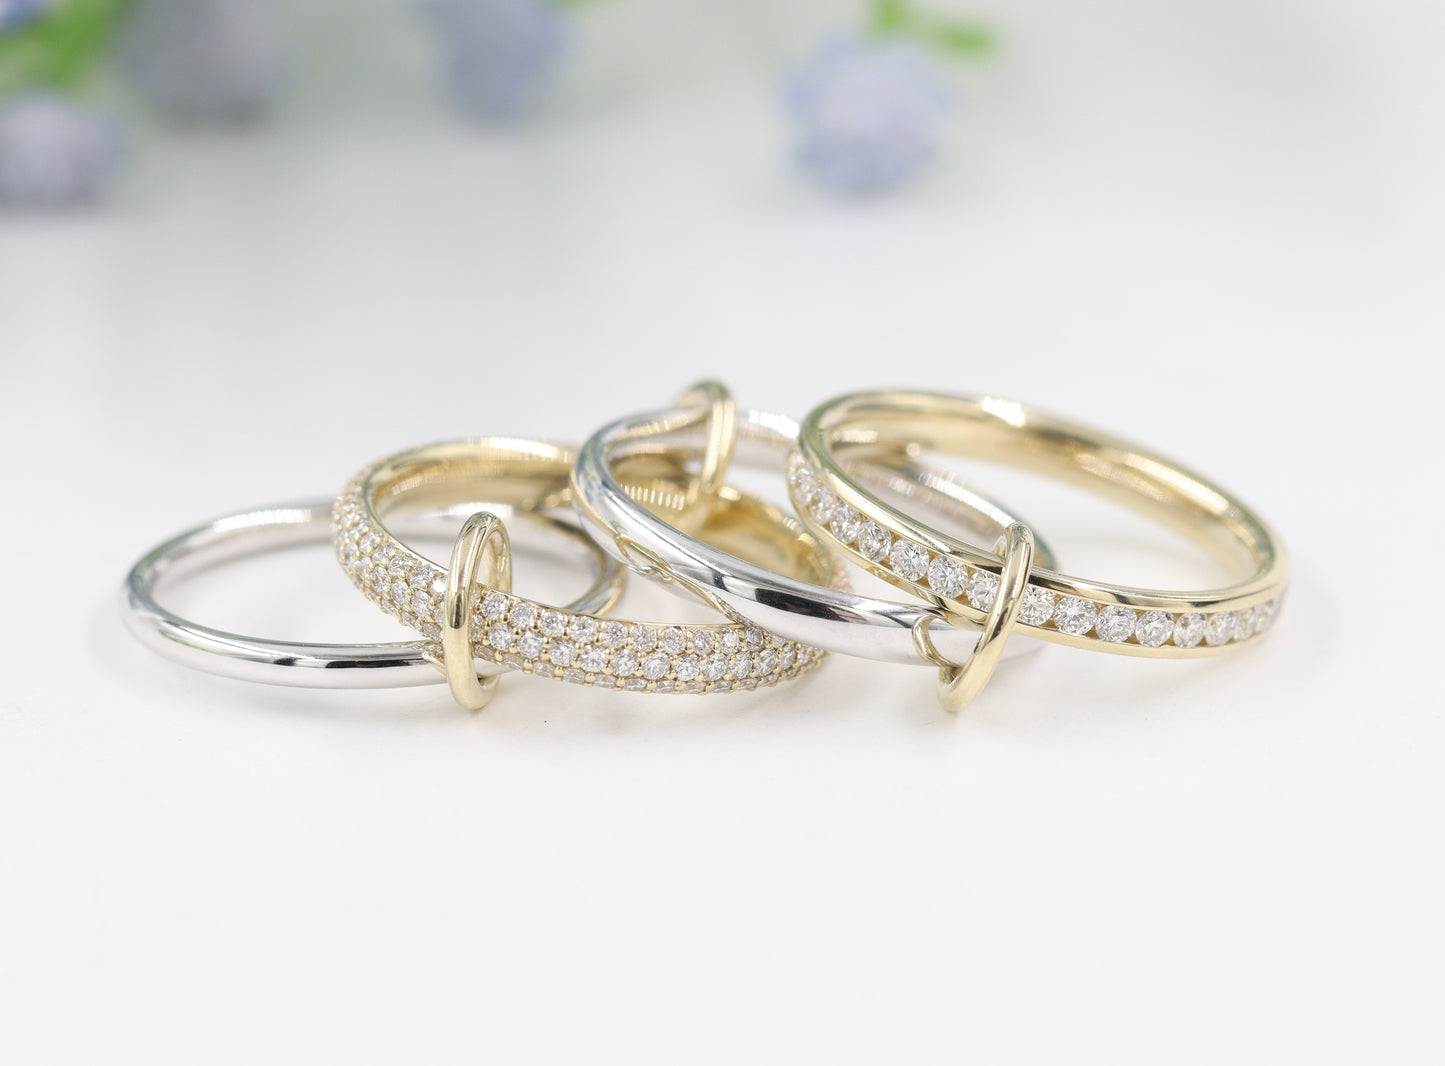 Two Eternity Natural Diamond Bands Two gold Bands with 3 connectors/Full Eternity Diamond Rings for Everyday/Sean's Bundle of 4 Rings